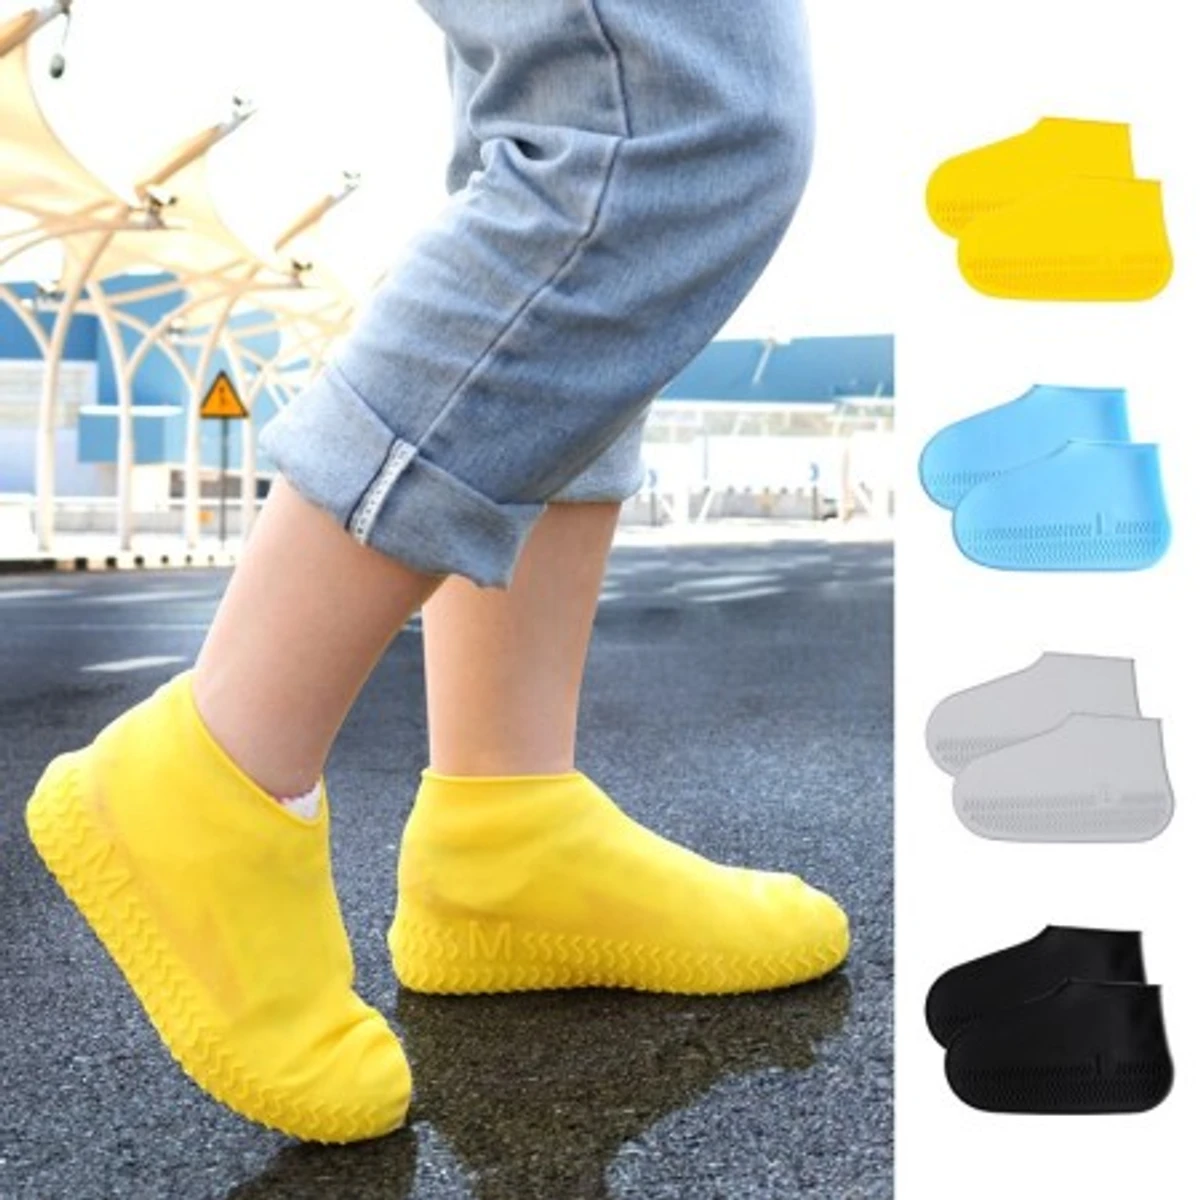 Boots Silicone WATERPROOF SHOE COVER Reusable Rain Shoe Covers